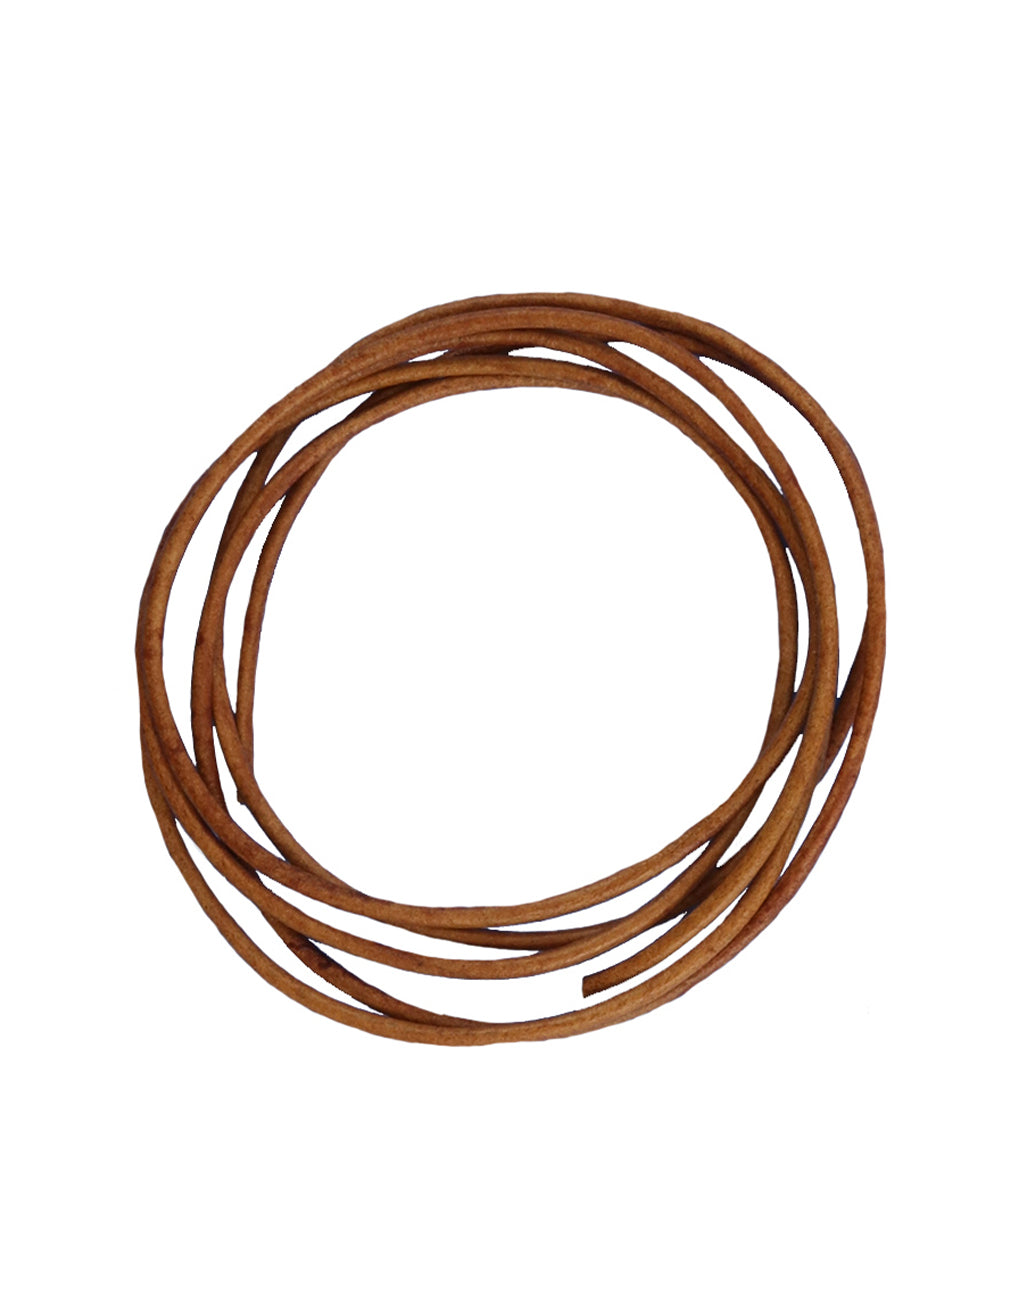 Saddle Tan Round Leather Cord, 1.5mm, (3ft)